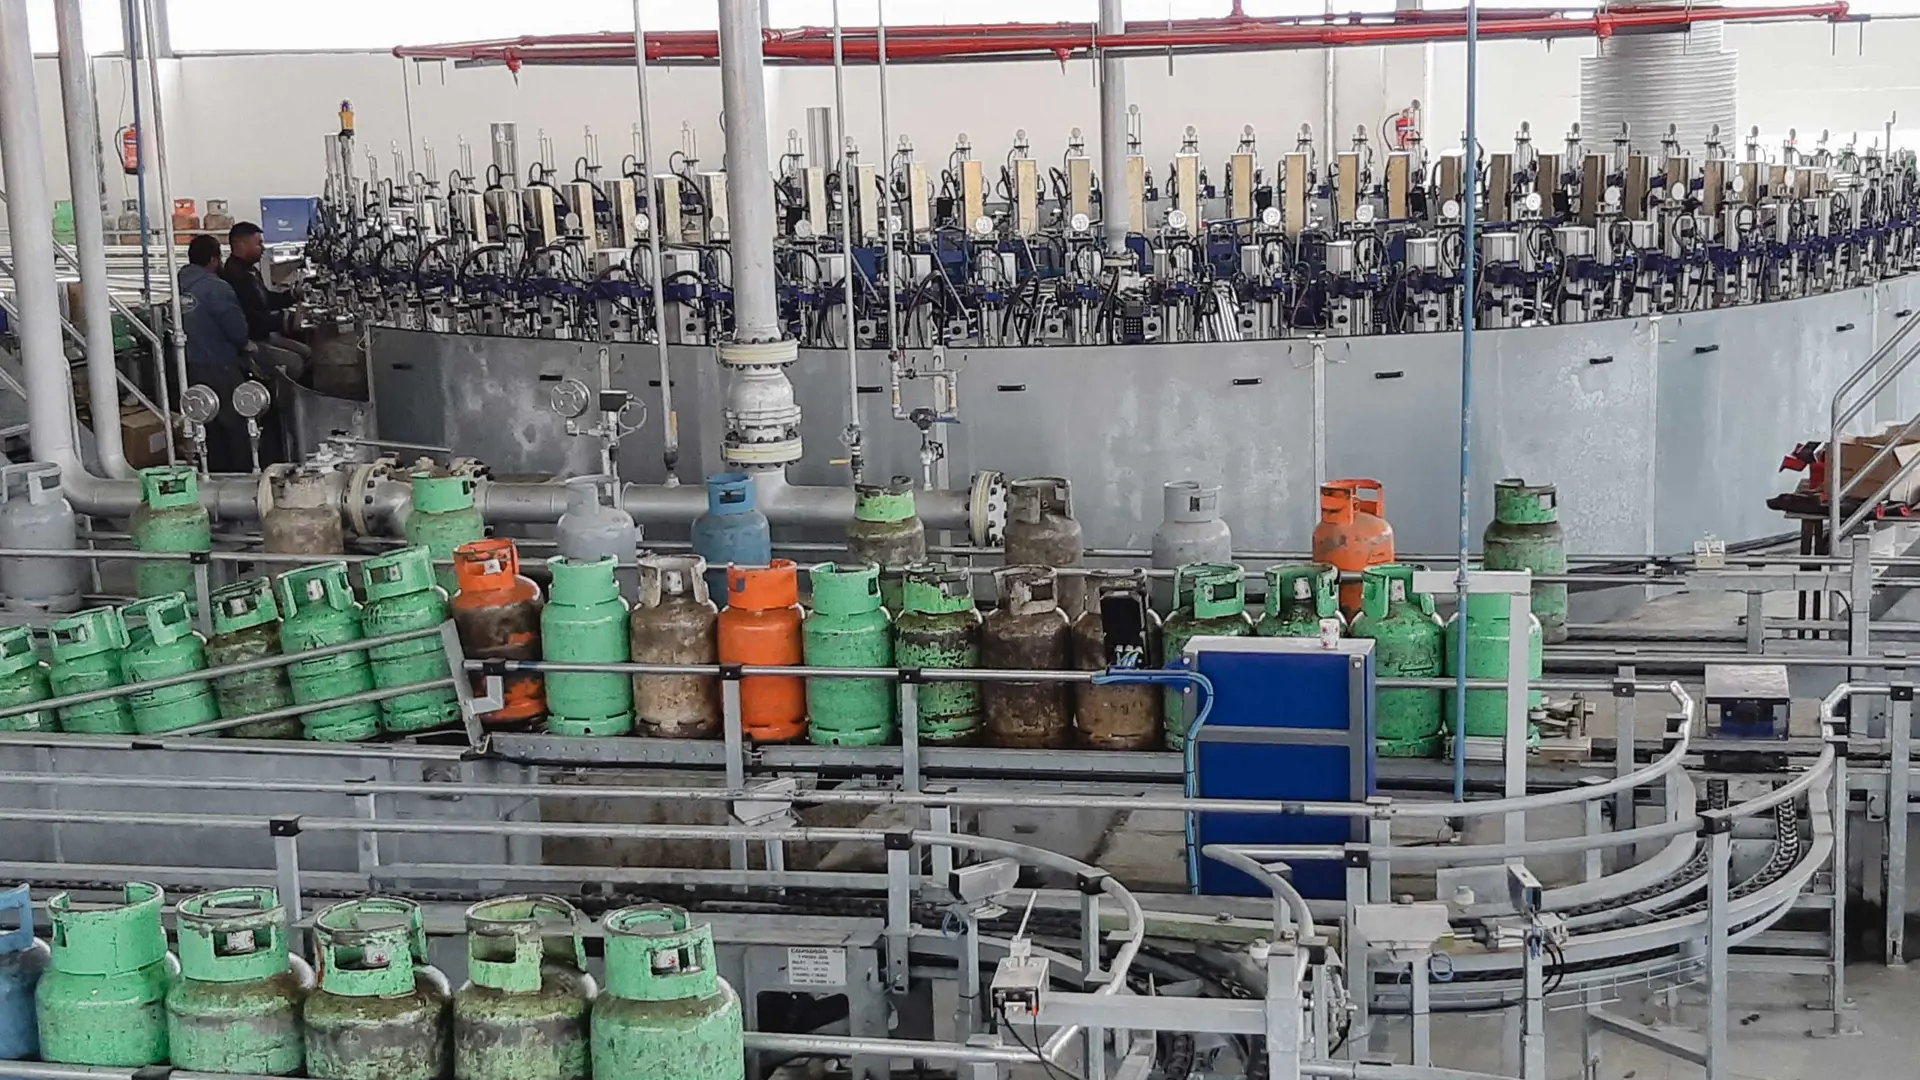 LPG cylinders on a conveyor in a Flexspeed system